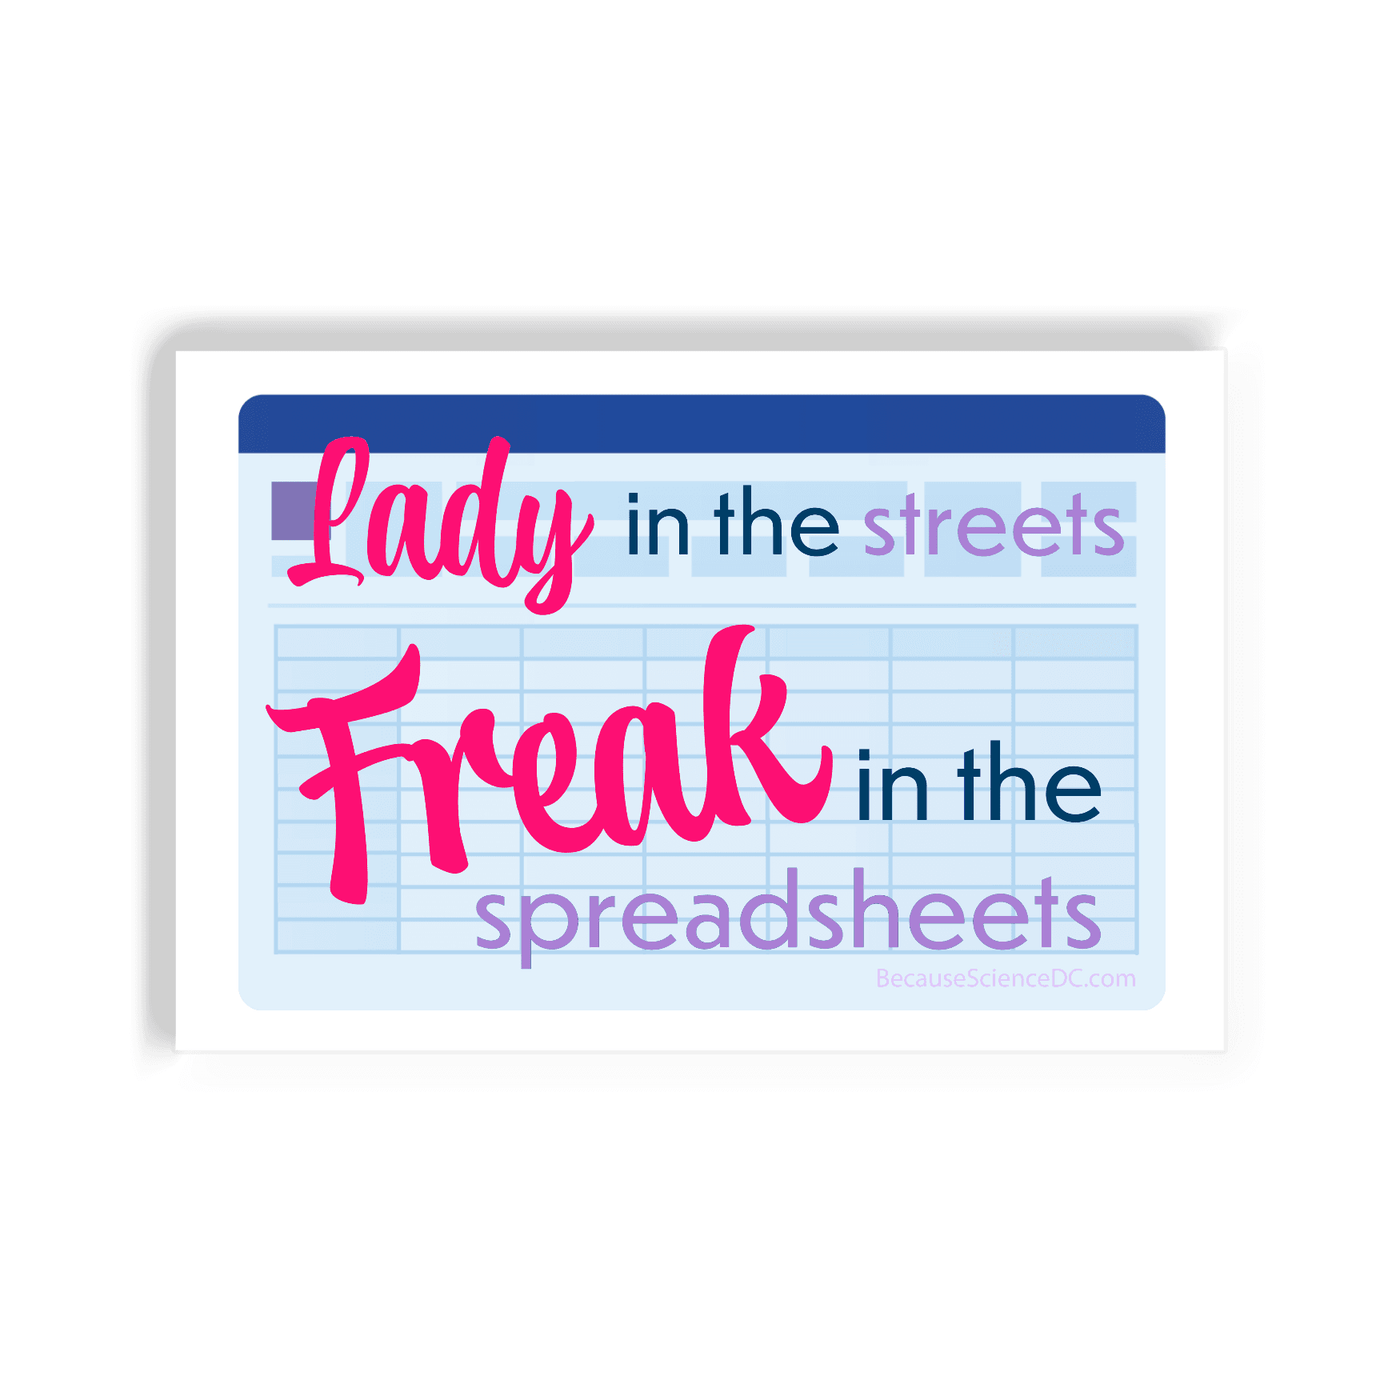 2x3 colorful magnet with image of a spreadsheet with text that says freak in the spreadsheets